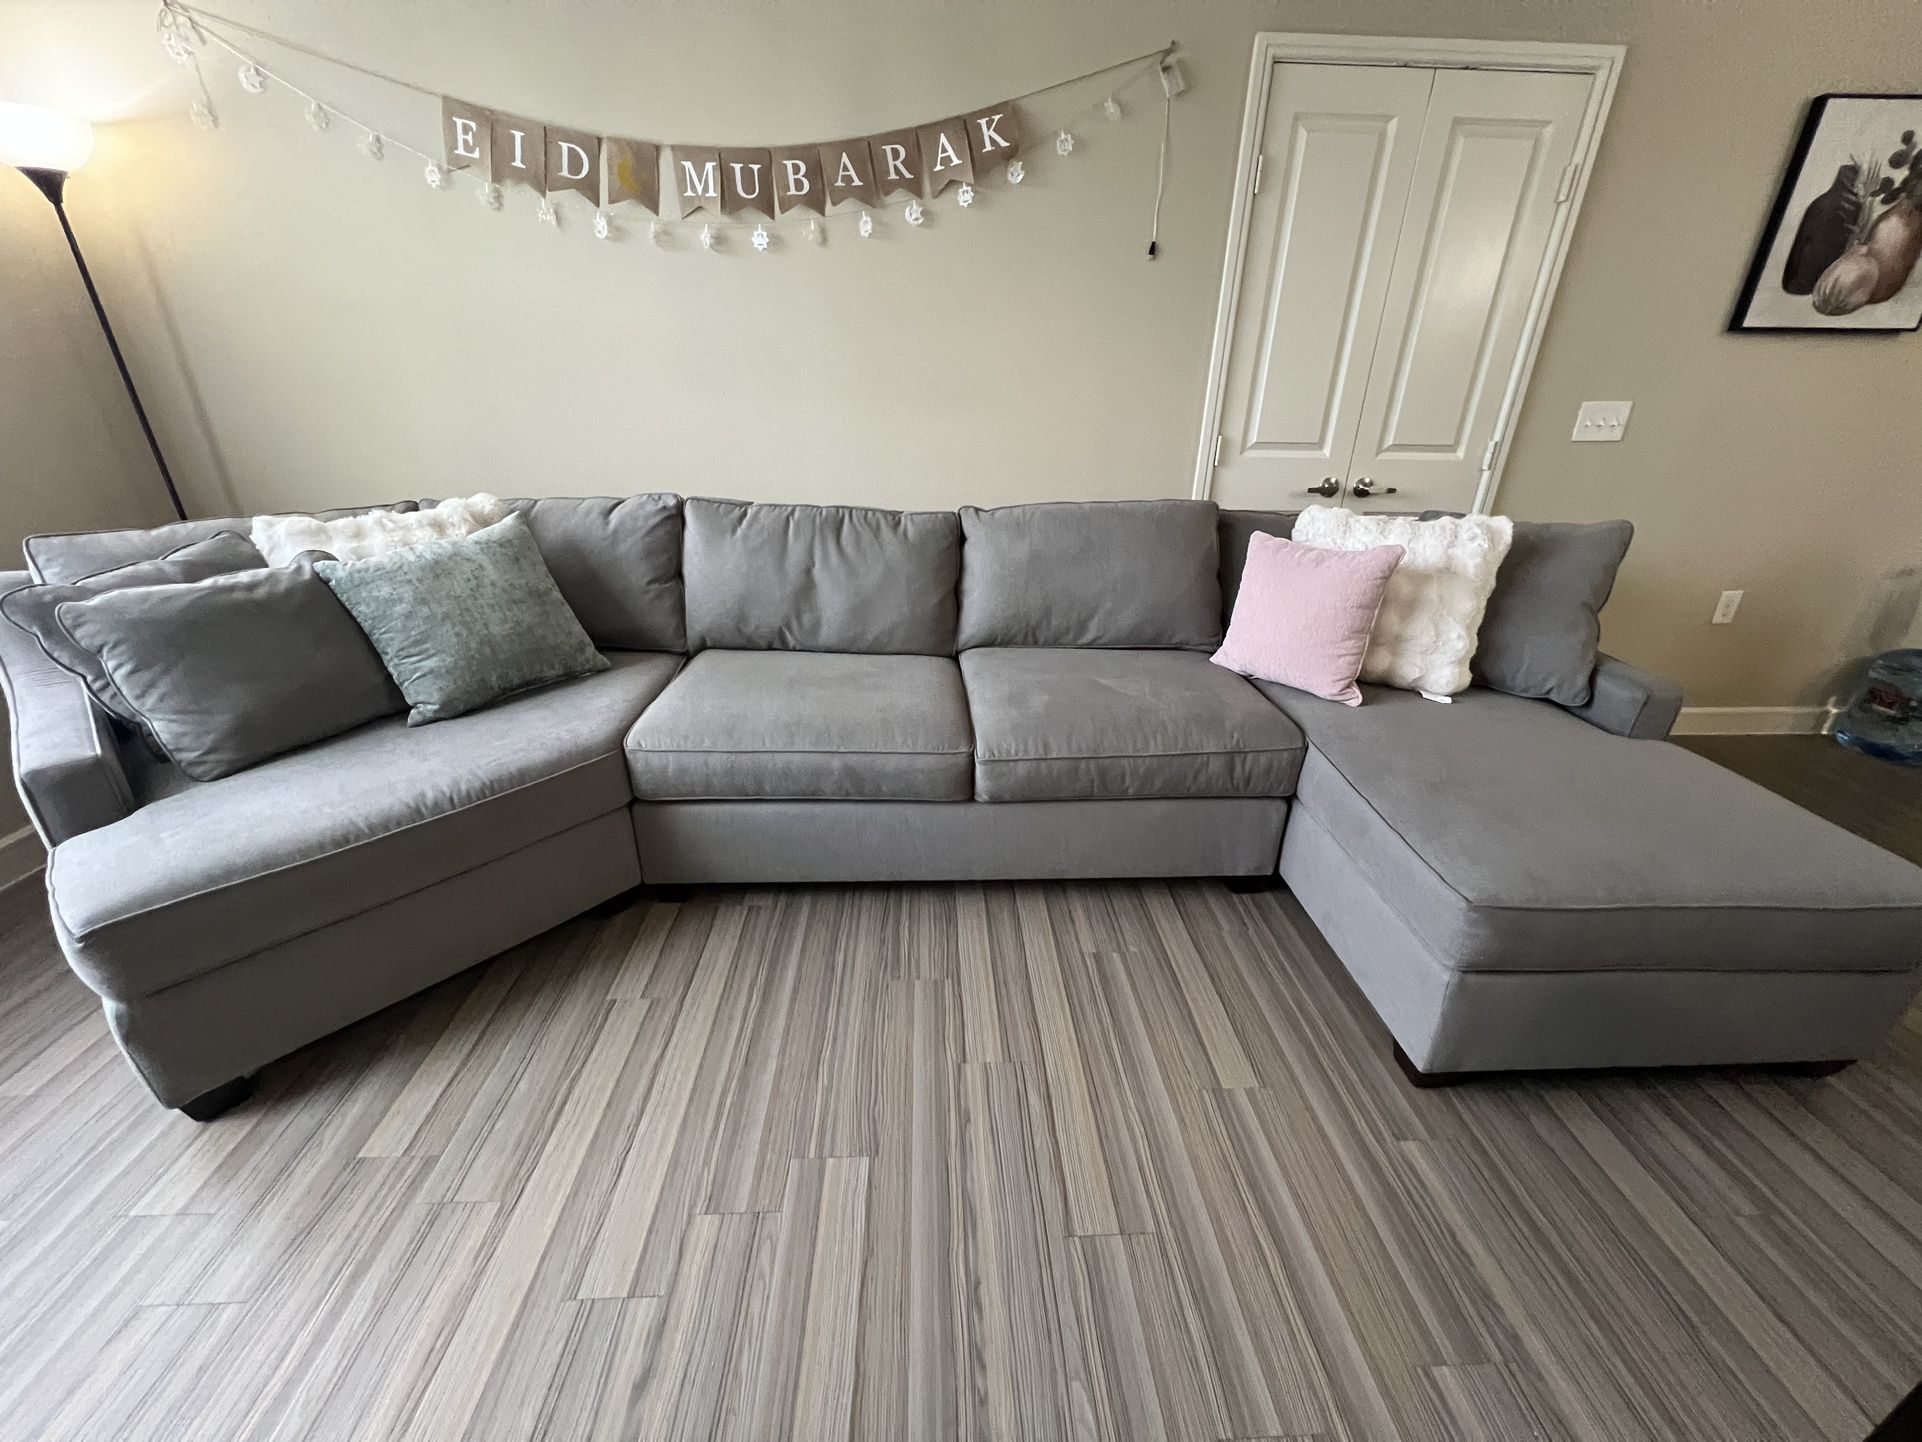 Couch For Sale - Used Less Than A Year